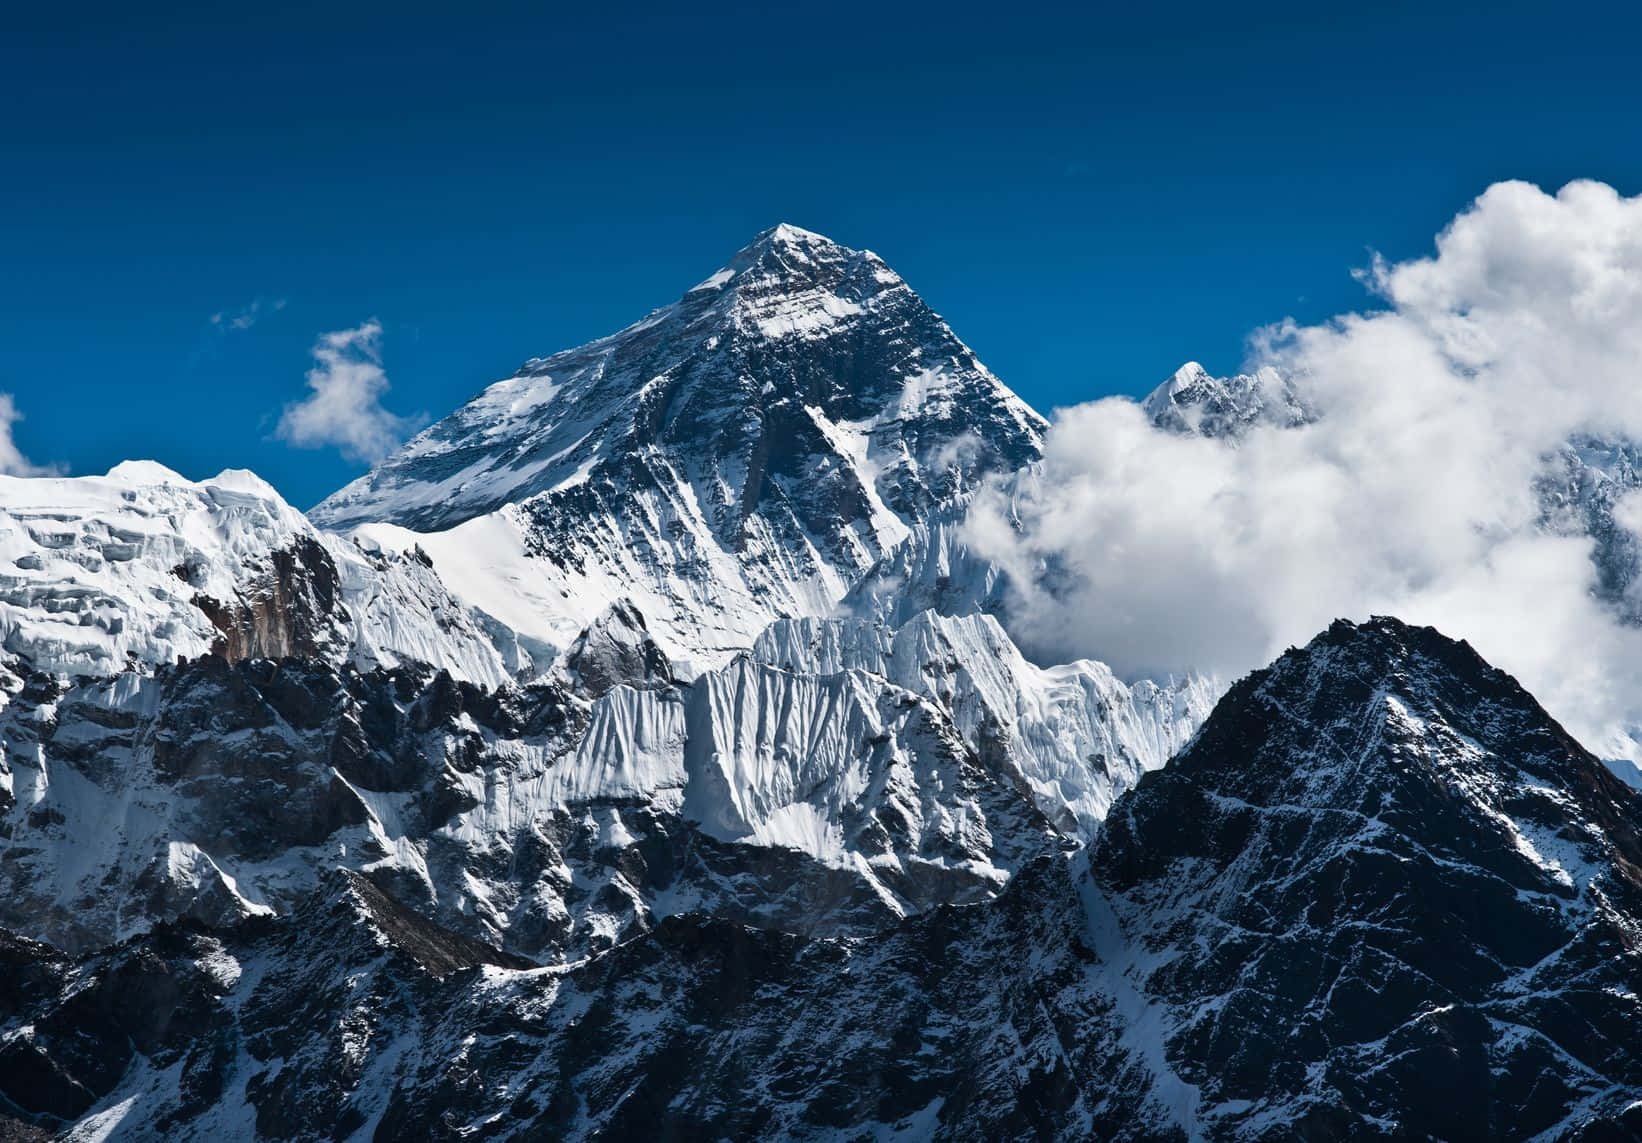 The stunning view from atop the world's tallest peak, Mount Everest.